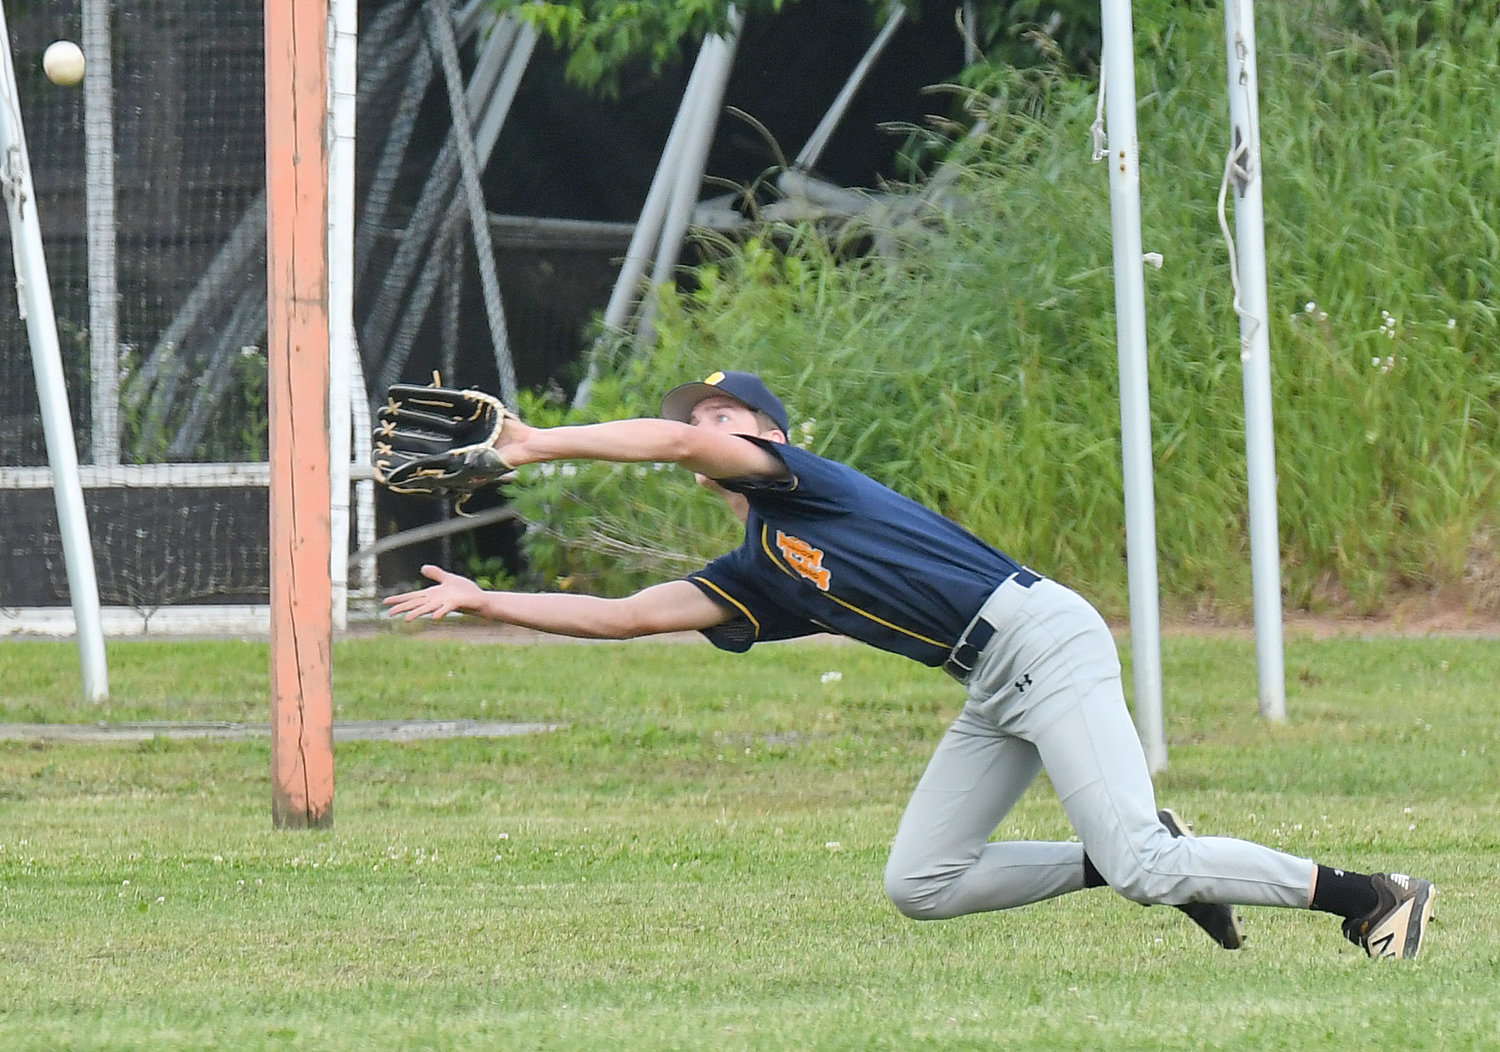 Ilion Post outfielder Will Maxwell dives to make the catch against Smith Post Wednesday night at RFA Stadium Field in Rome. The visitors won 5-4 in District V American Legion baseball.